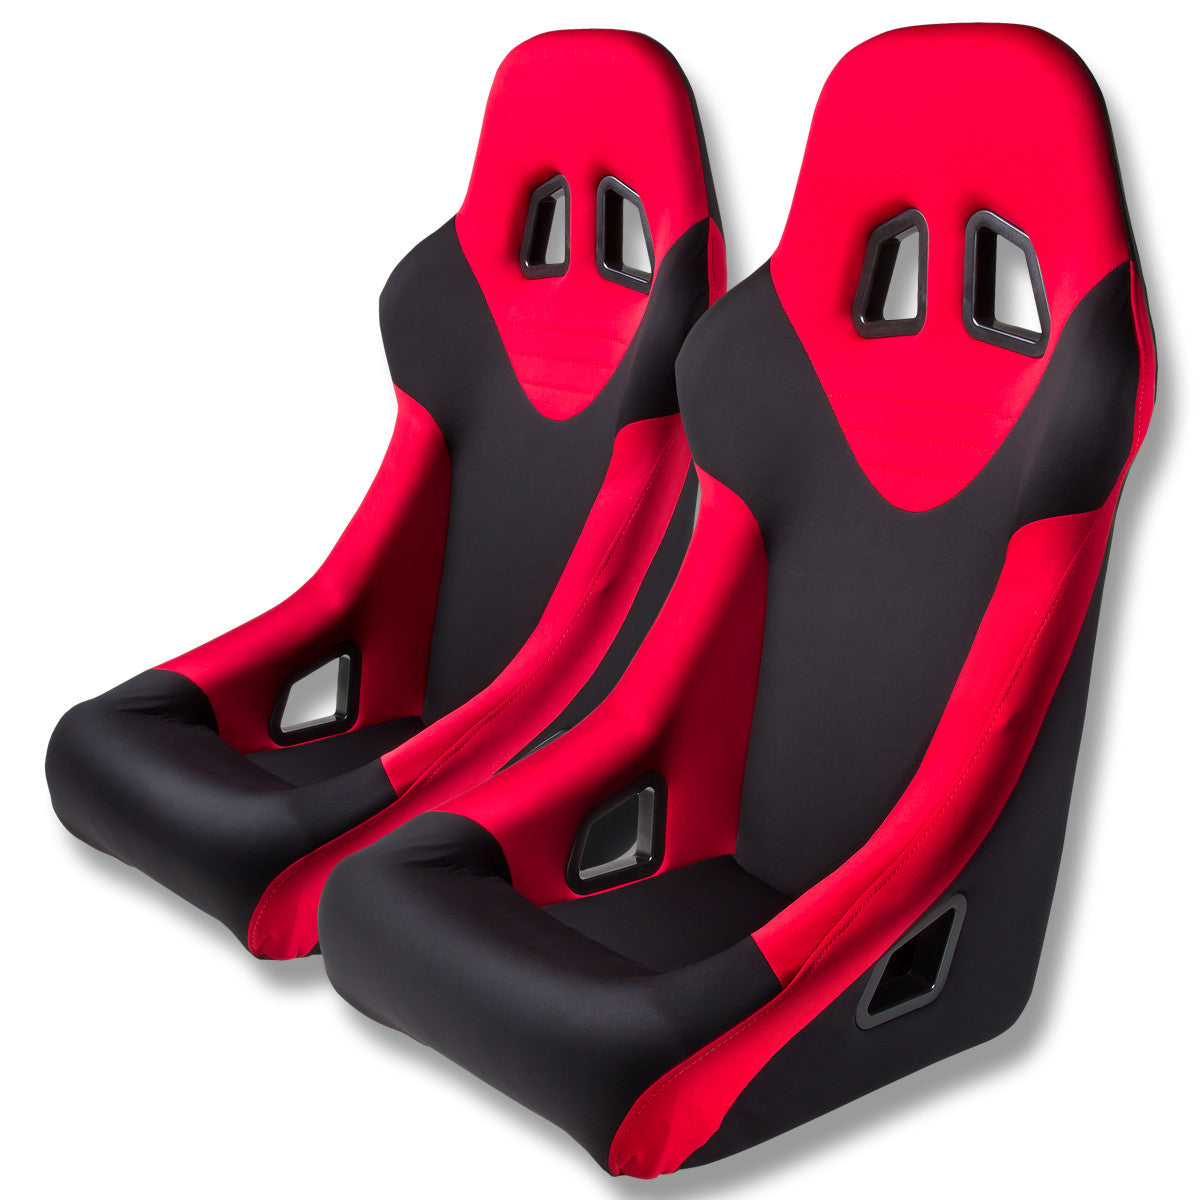 Driver + Passenger Side Sport Style Fabric Clothes Racing Seat w/Universal Sliders